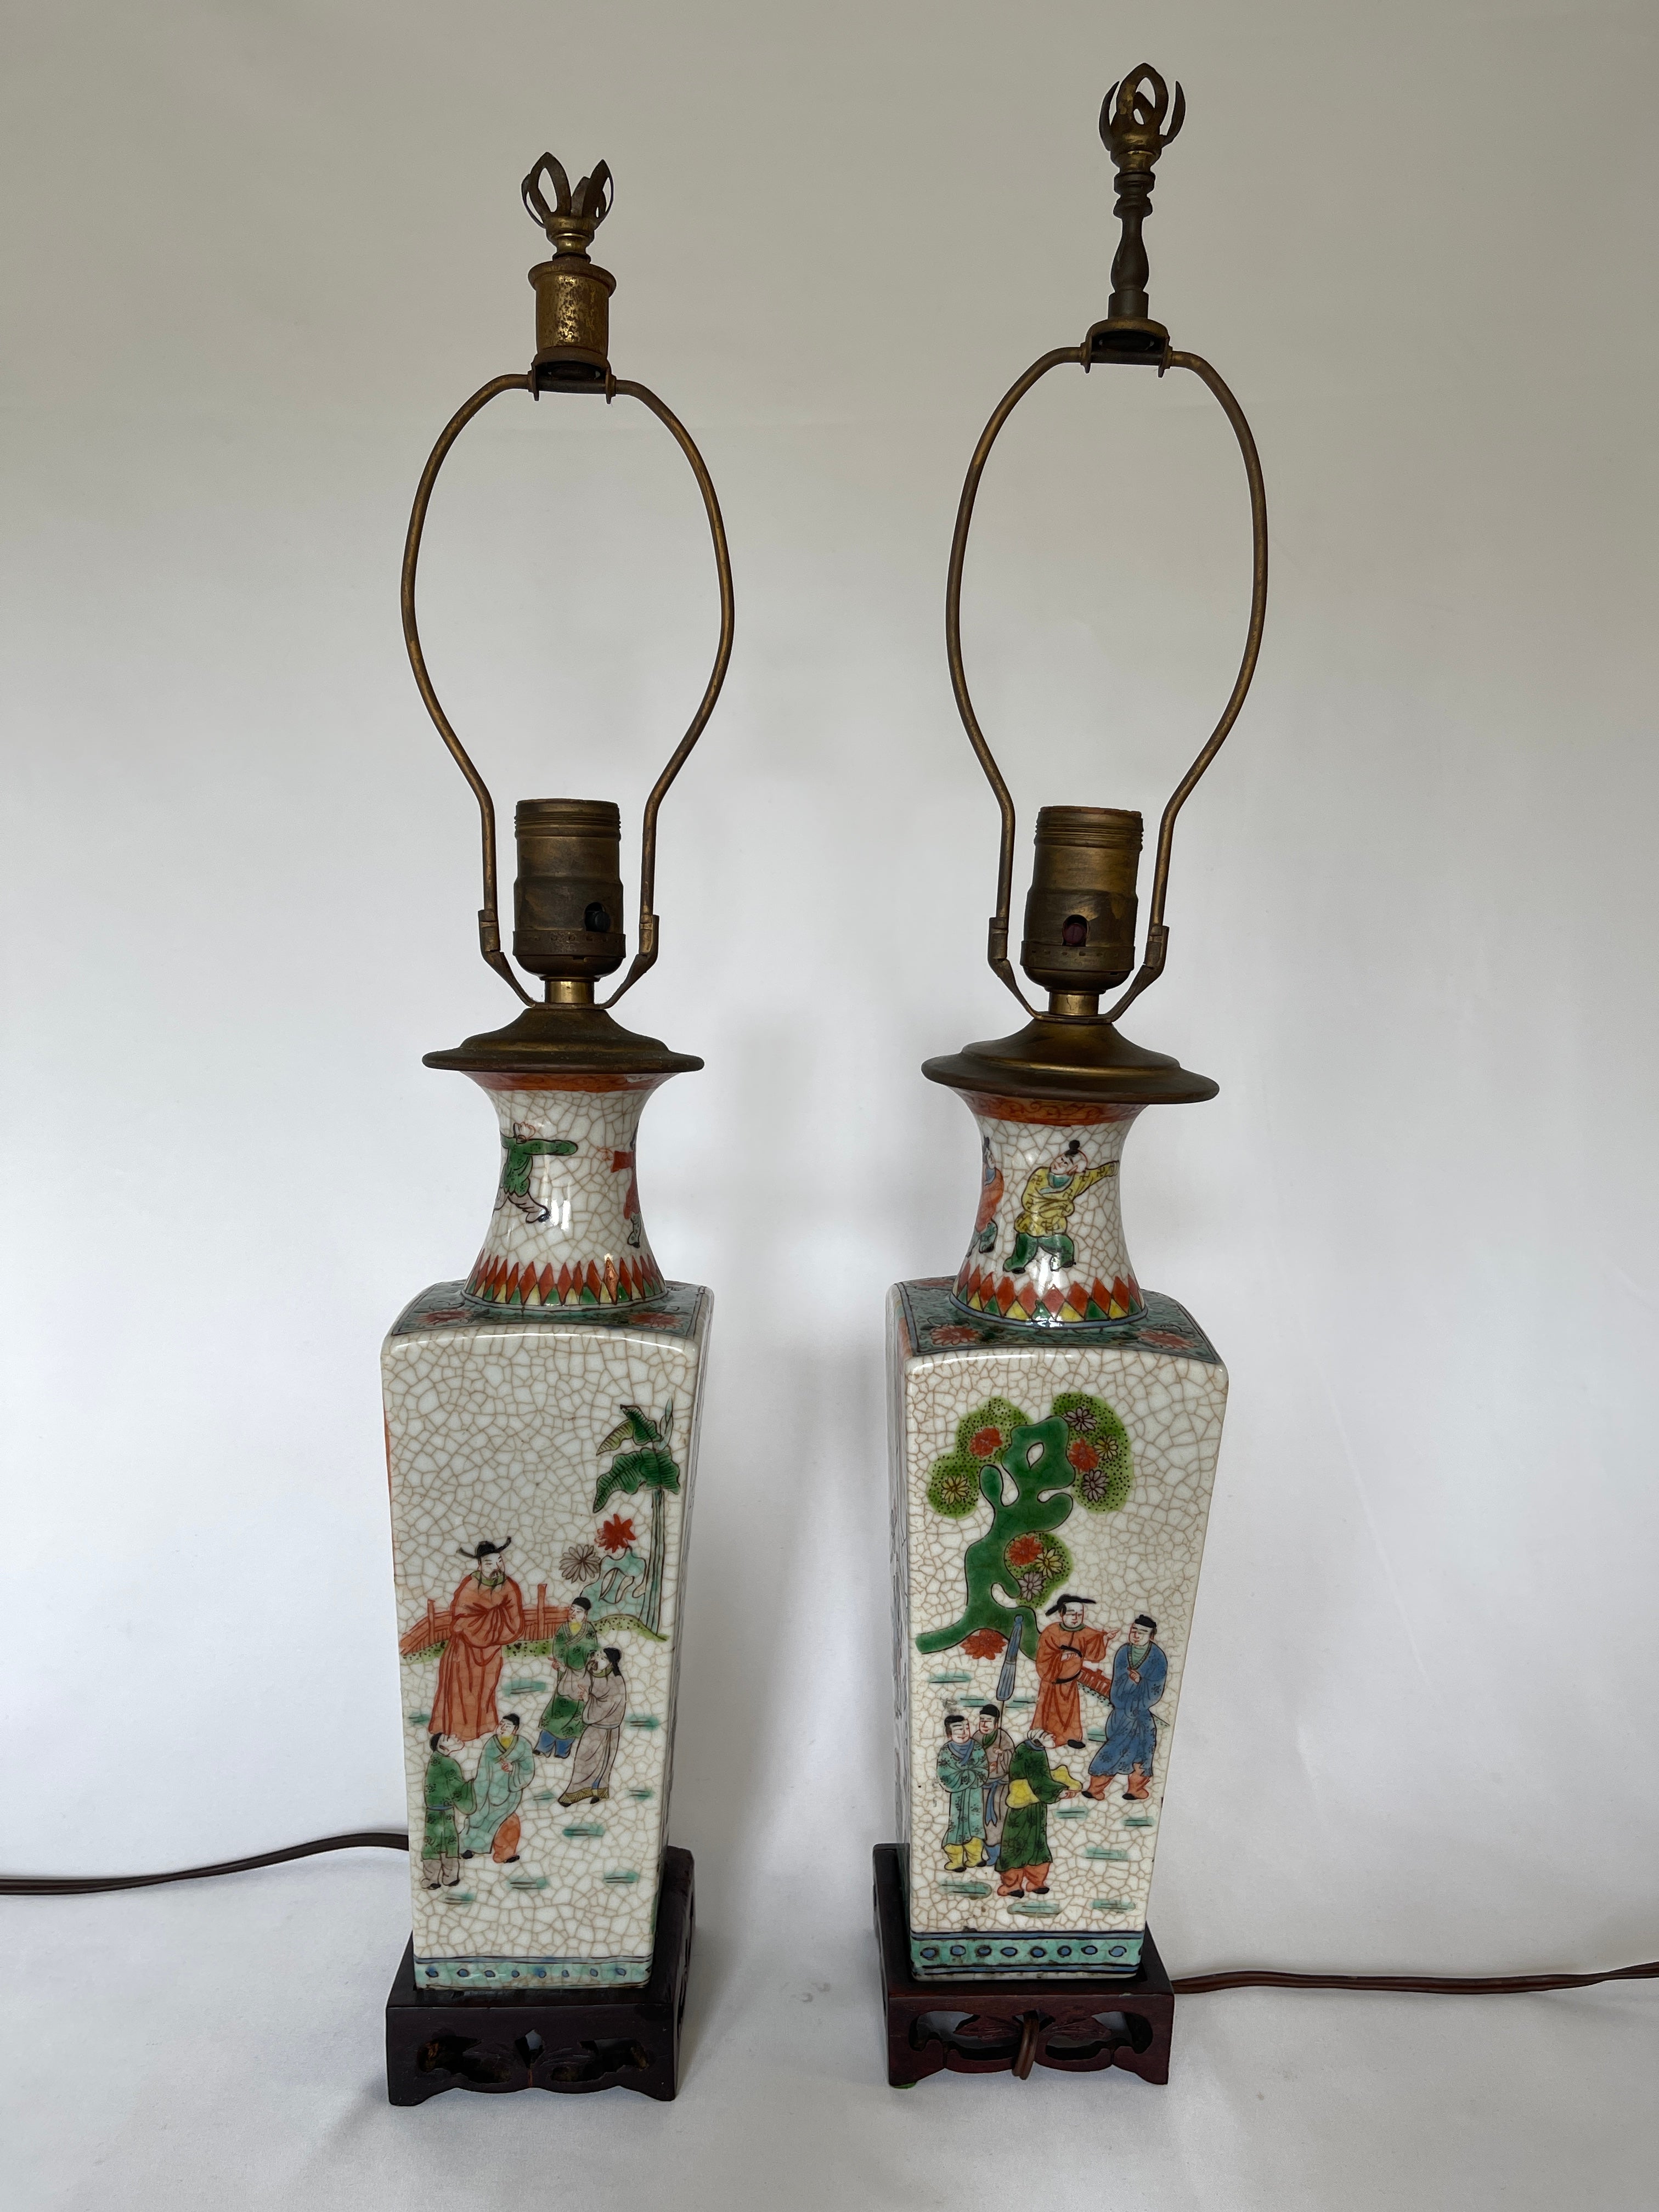 Pair of 19th century Chinese Export crackle ware vase lamps on carved hardwood square bases. Entirely hand decorated, each slightly different from the other. 
The lamps retain original wiring with bakelite switches, and need rewiring.
Lamp body from